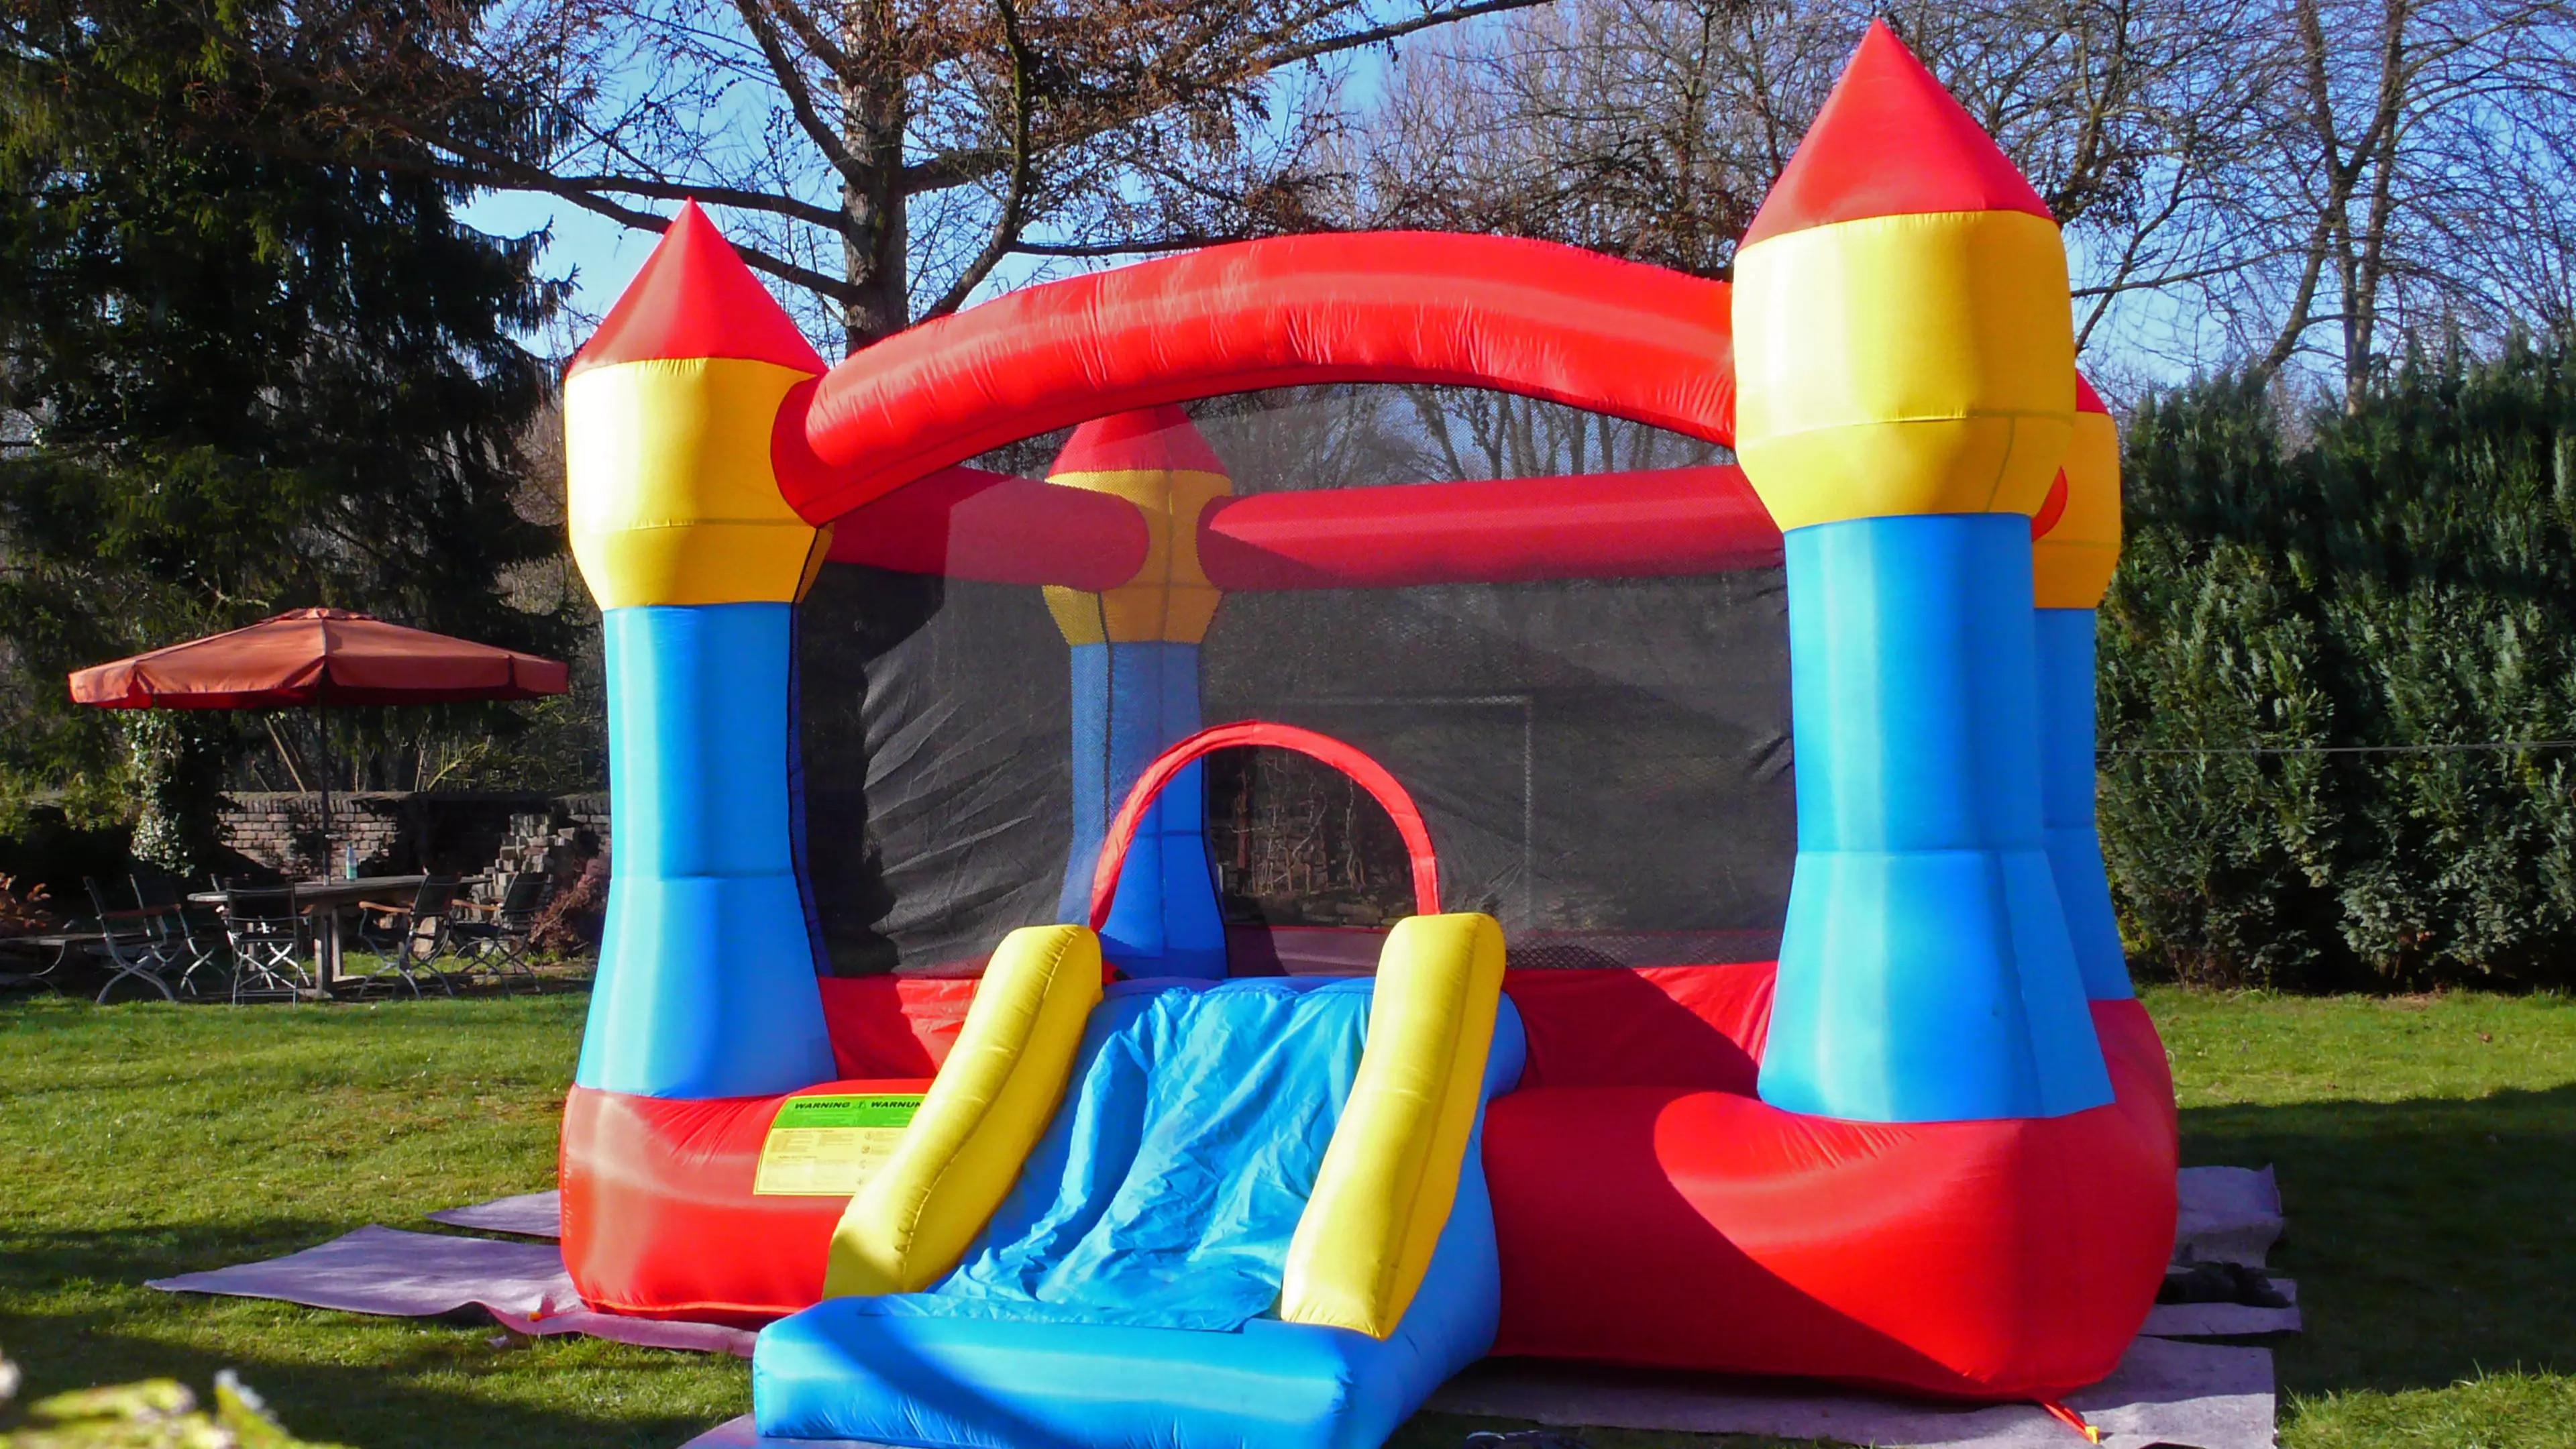 Two Children Killed And Others Critical After Jumping Castle Was Pulled Into The Air